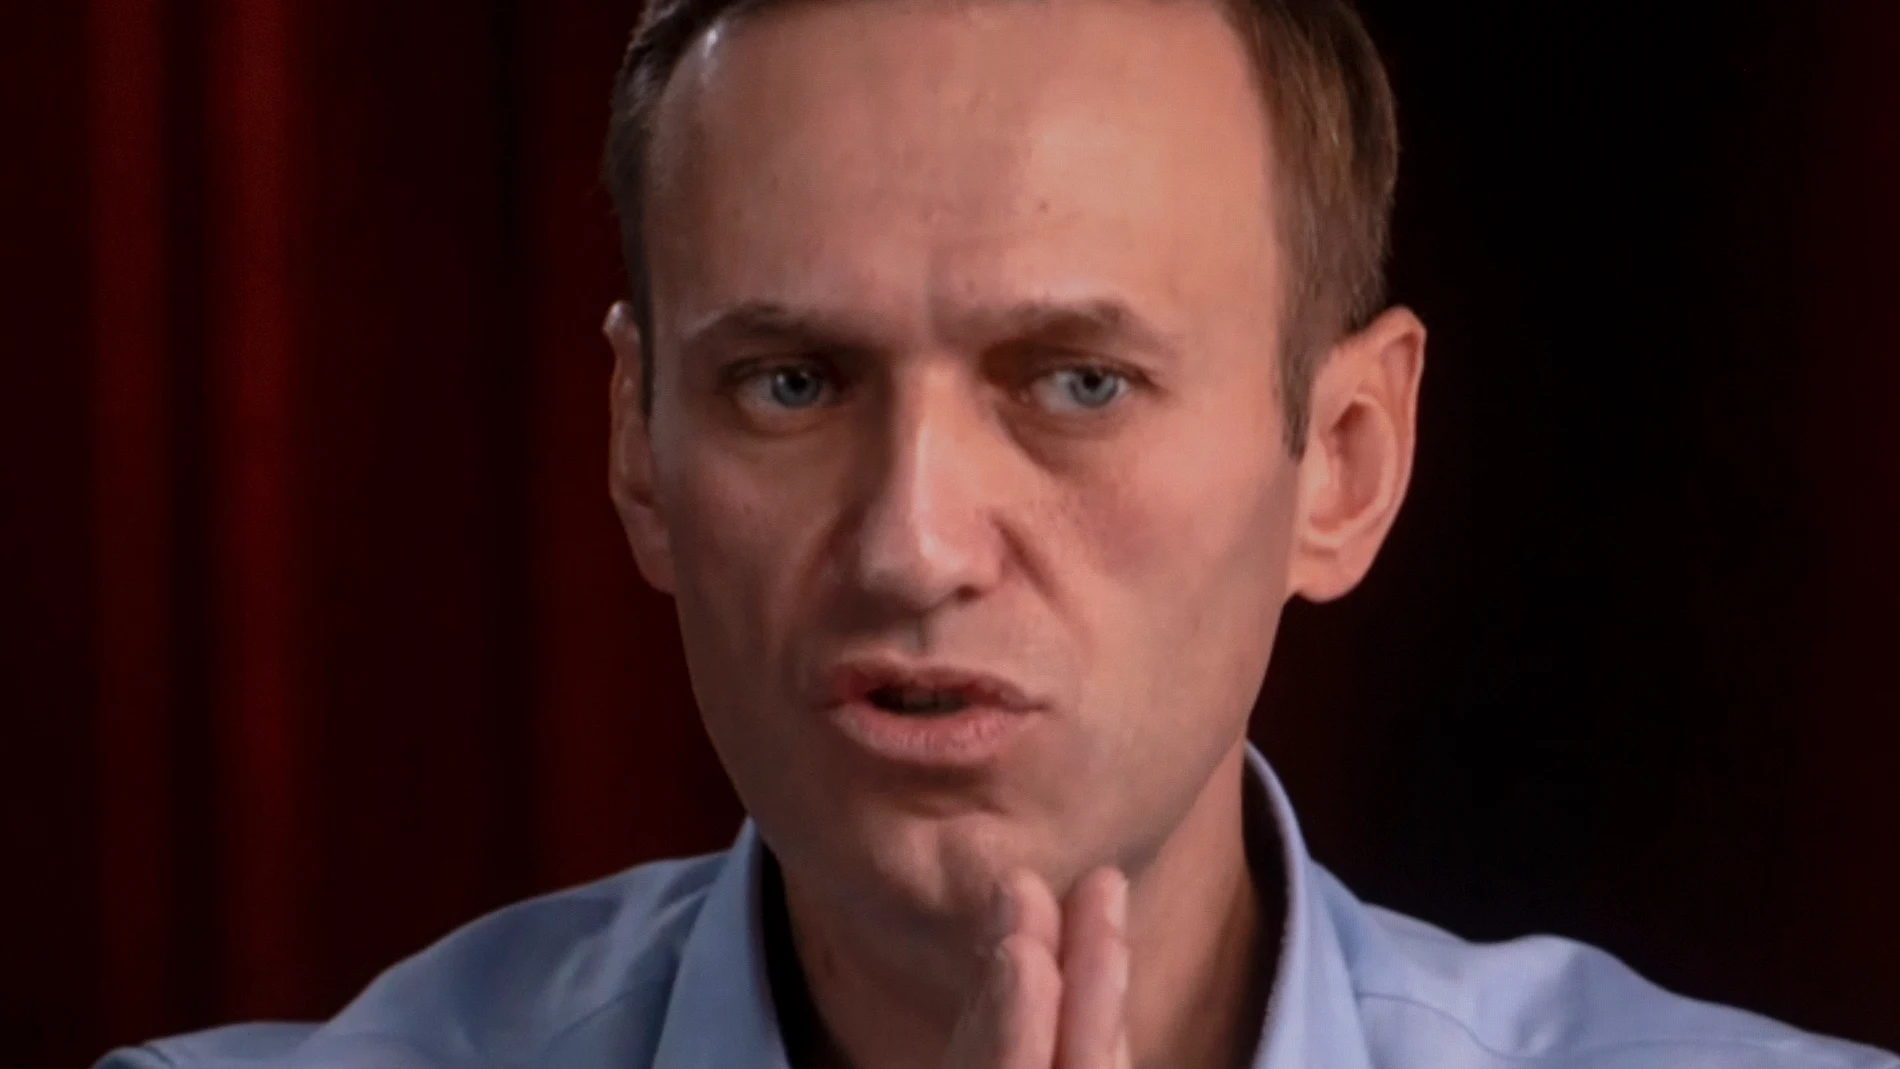 April 25, 2021, New York, New York, USA - ALEXEY NAVALNY's political and anti-corruption organizations are under attack from Moscows's chief prosecutor, who is trying to outlaw them as extremist groups. FILE PHOTO: October 18, 2020, Berlin, Germany - '60 Minutes' conducts an interview with ALEXEY NAVALNY after had had recovered from the attempt on his life with the nerve agent, Novichok. (Foto de ARCHIVO) 25/04/2021